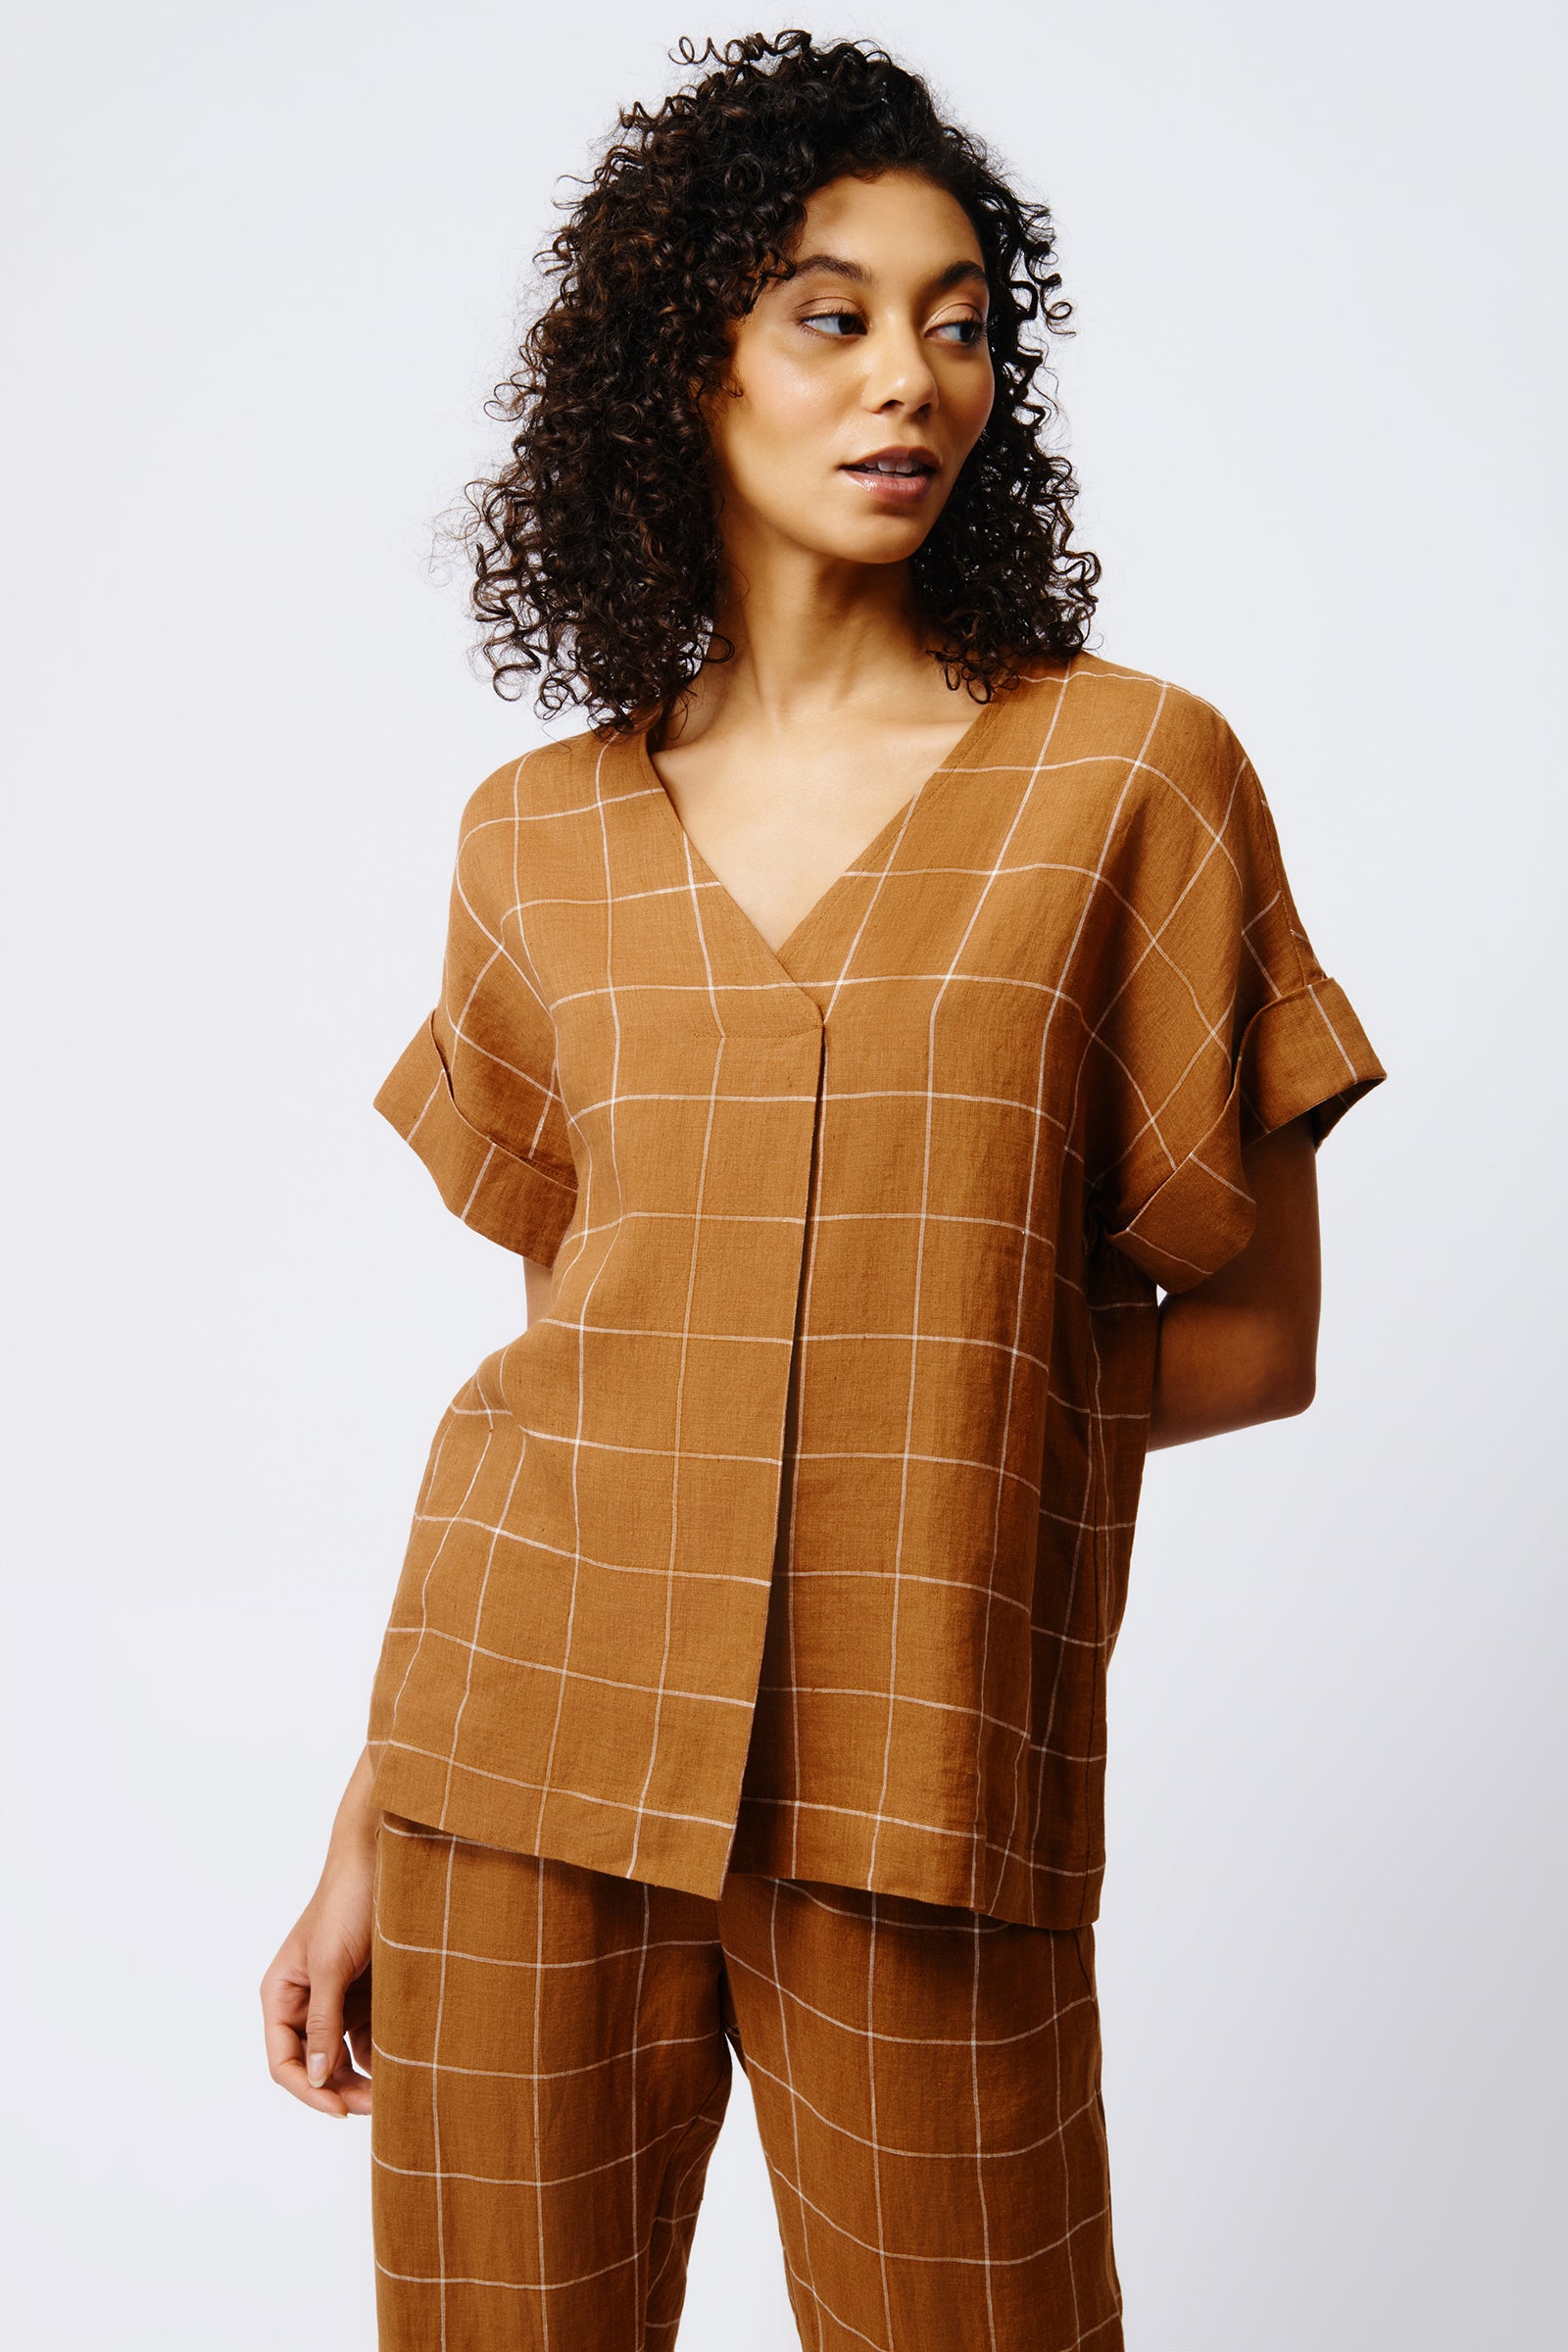 Kal Rieman Audrey Fold Front Kimono Top in Rust Windowpane on Model Front View Crop 2